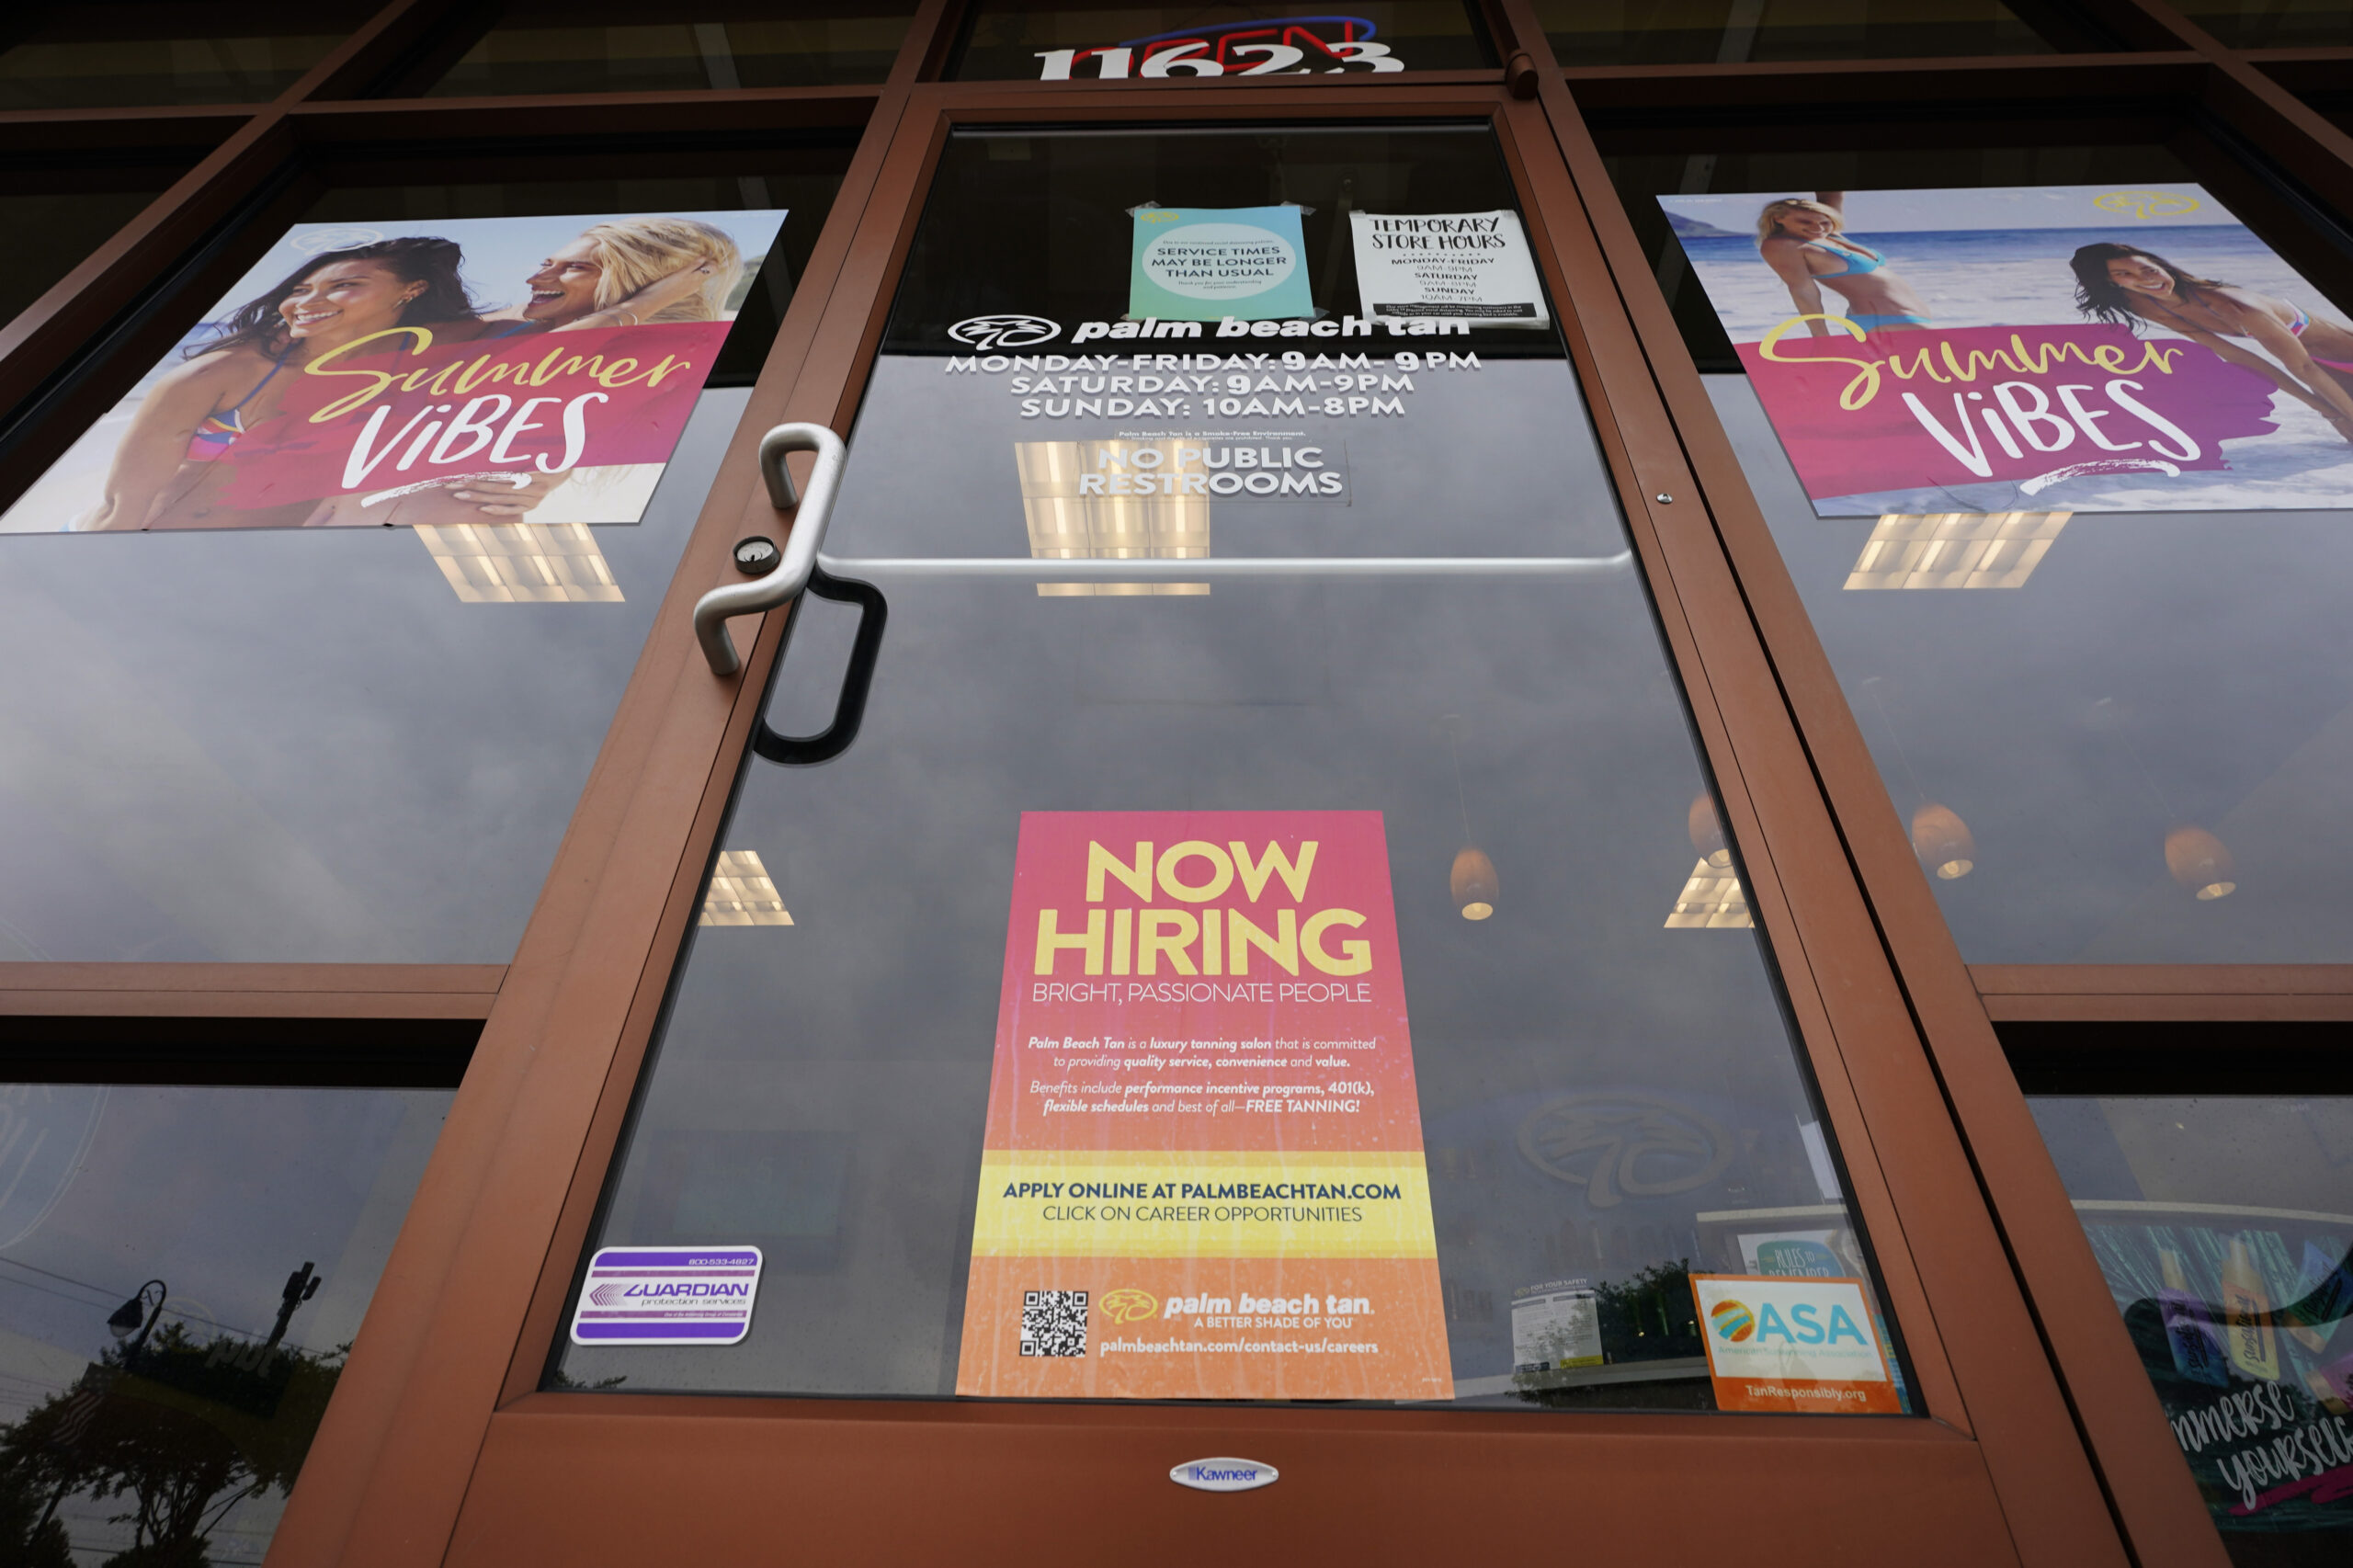 FILE - A Now Hiring sign at a business in Richmond, Va., Wednesday, June 2, 2021. U.S. employers posted a record 10.1 million job openings in June, another sign that the job market and economy are bouncing back briskly from last year’s coronavirus shutdowns. The Labor Department reported Monday, Aug. 9, 2021 that job openings rose from 9.5 million in May. (AP Photo/Steve Helber)